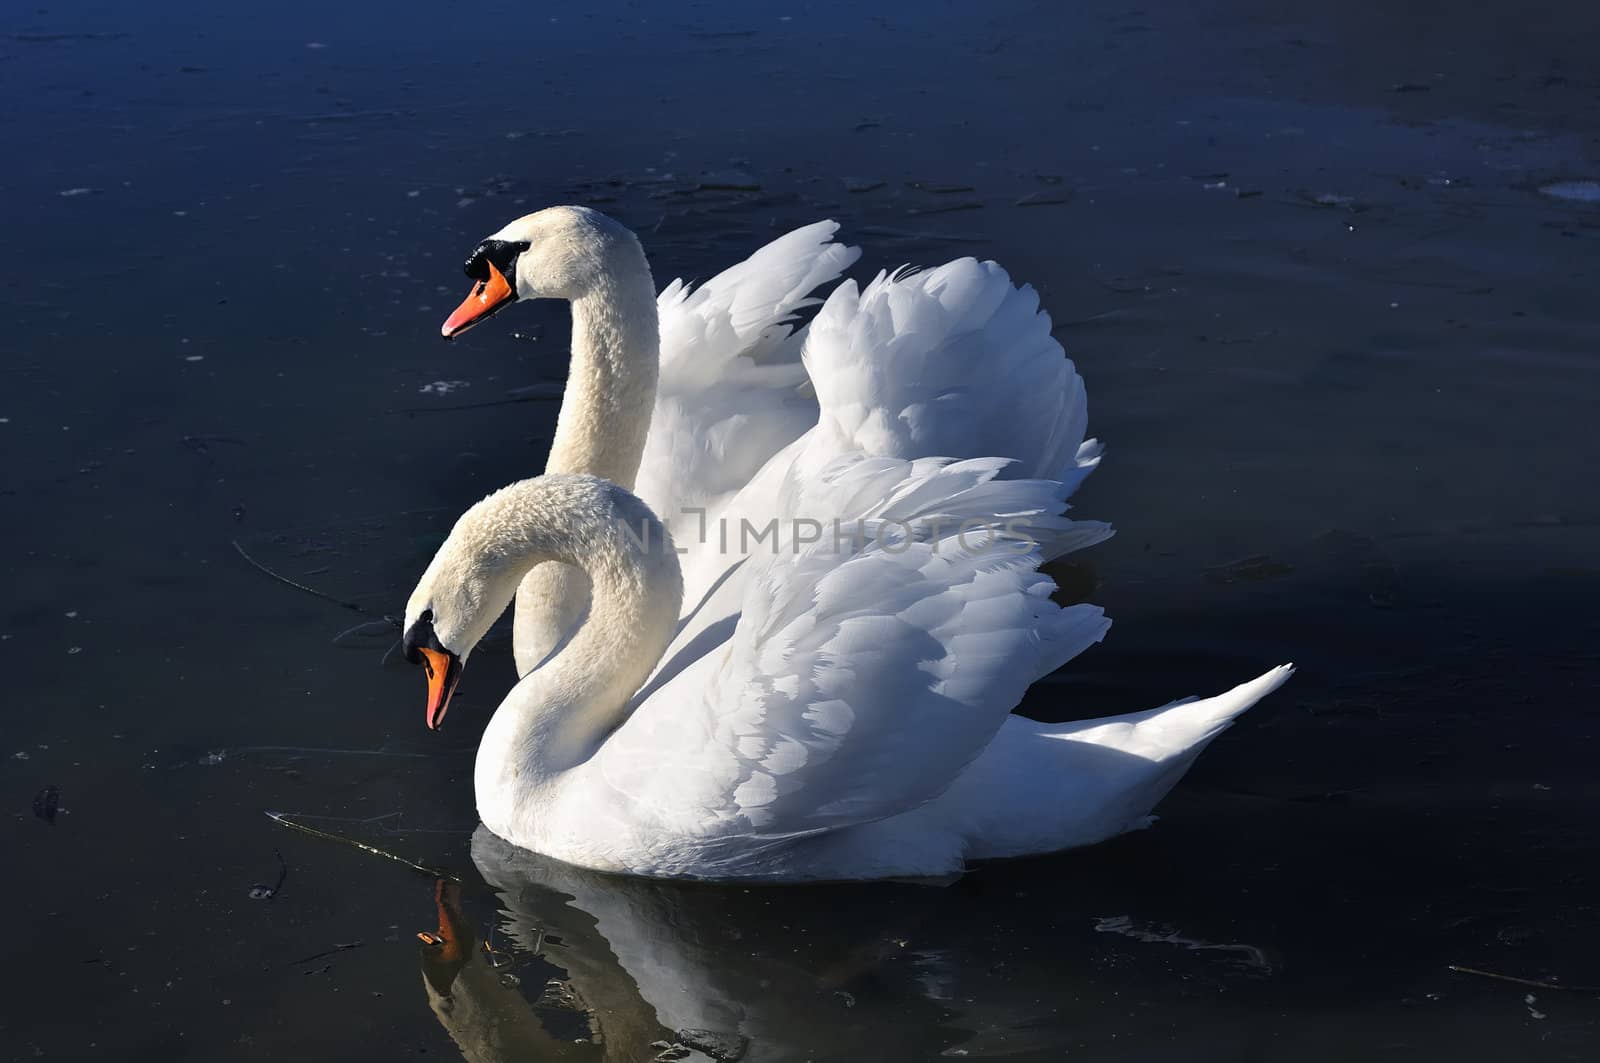 Two lovely swans by zagart36